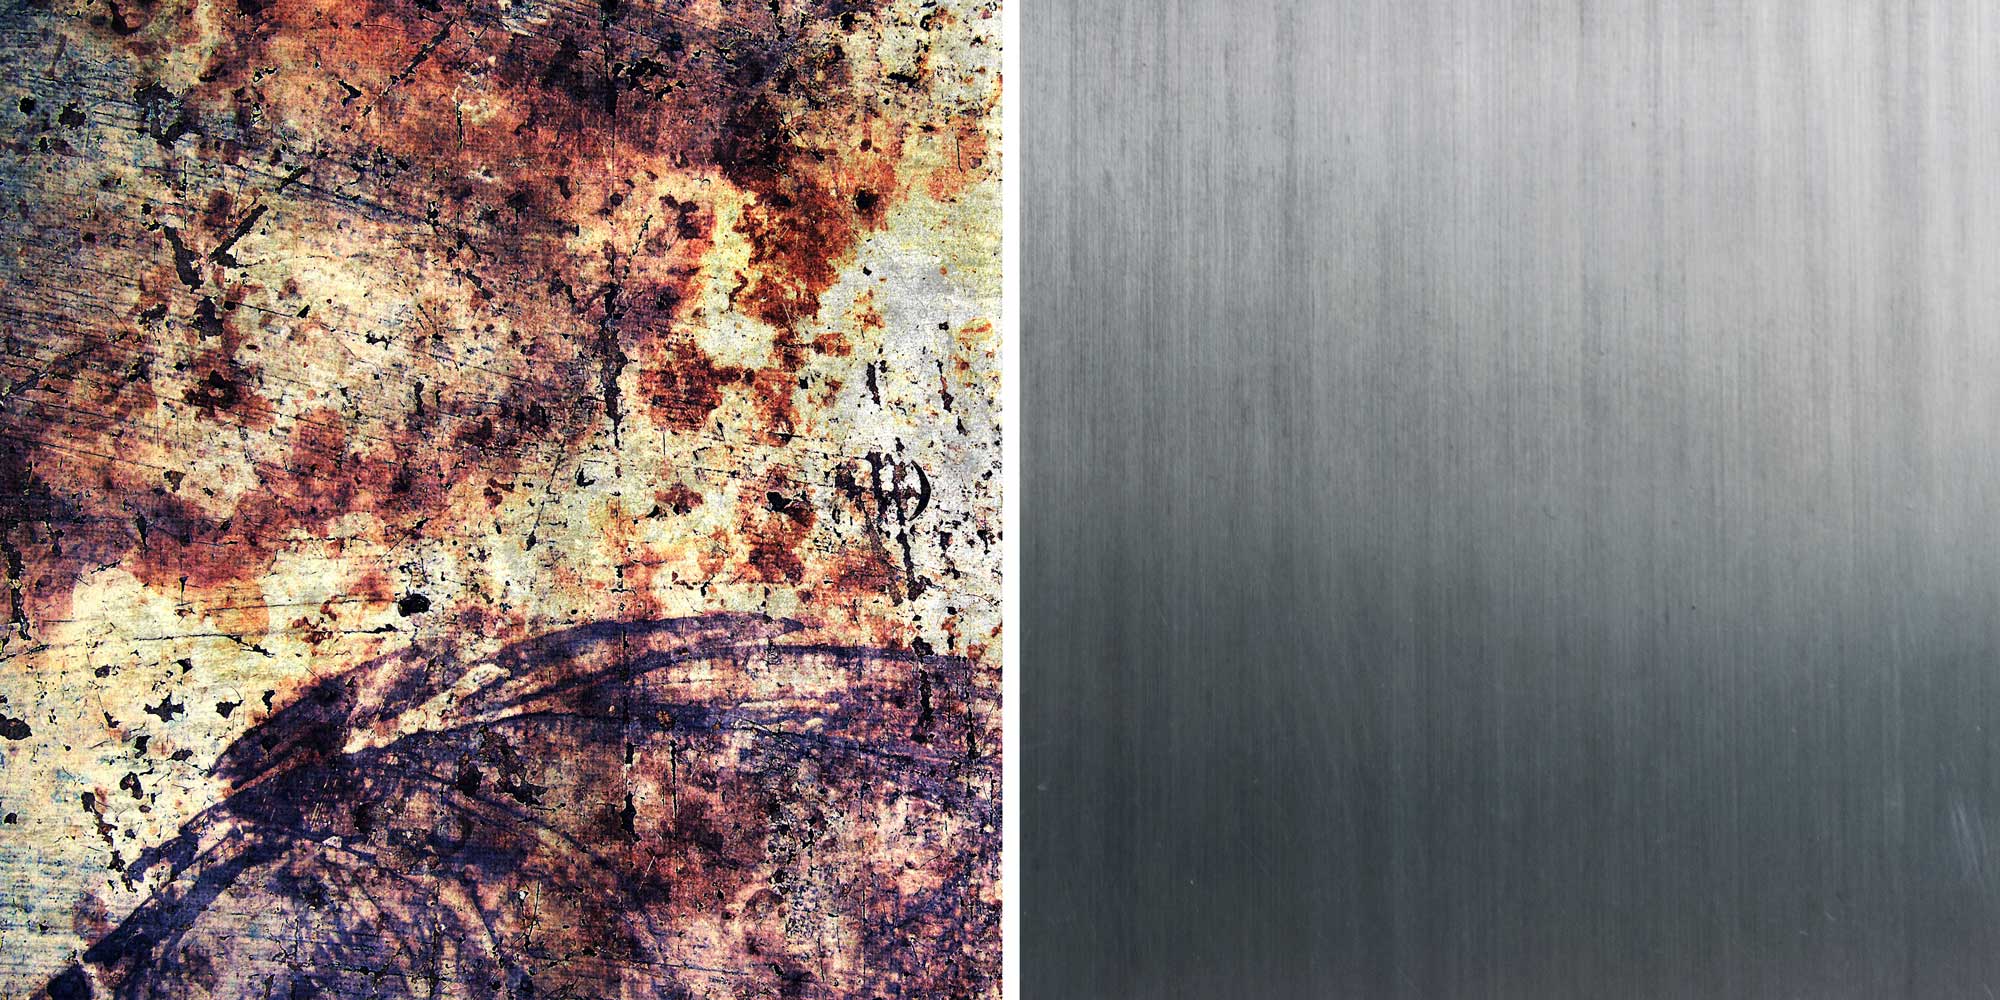 Corroded steel and stainless steel with corrosion resistance